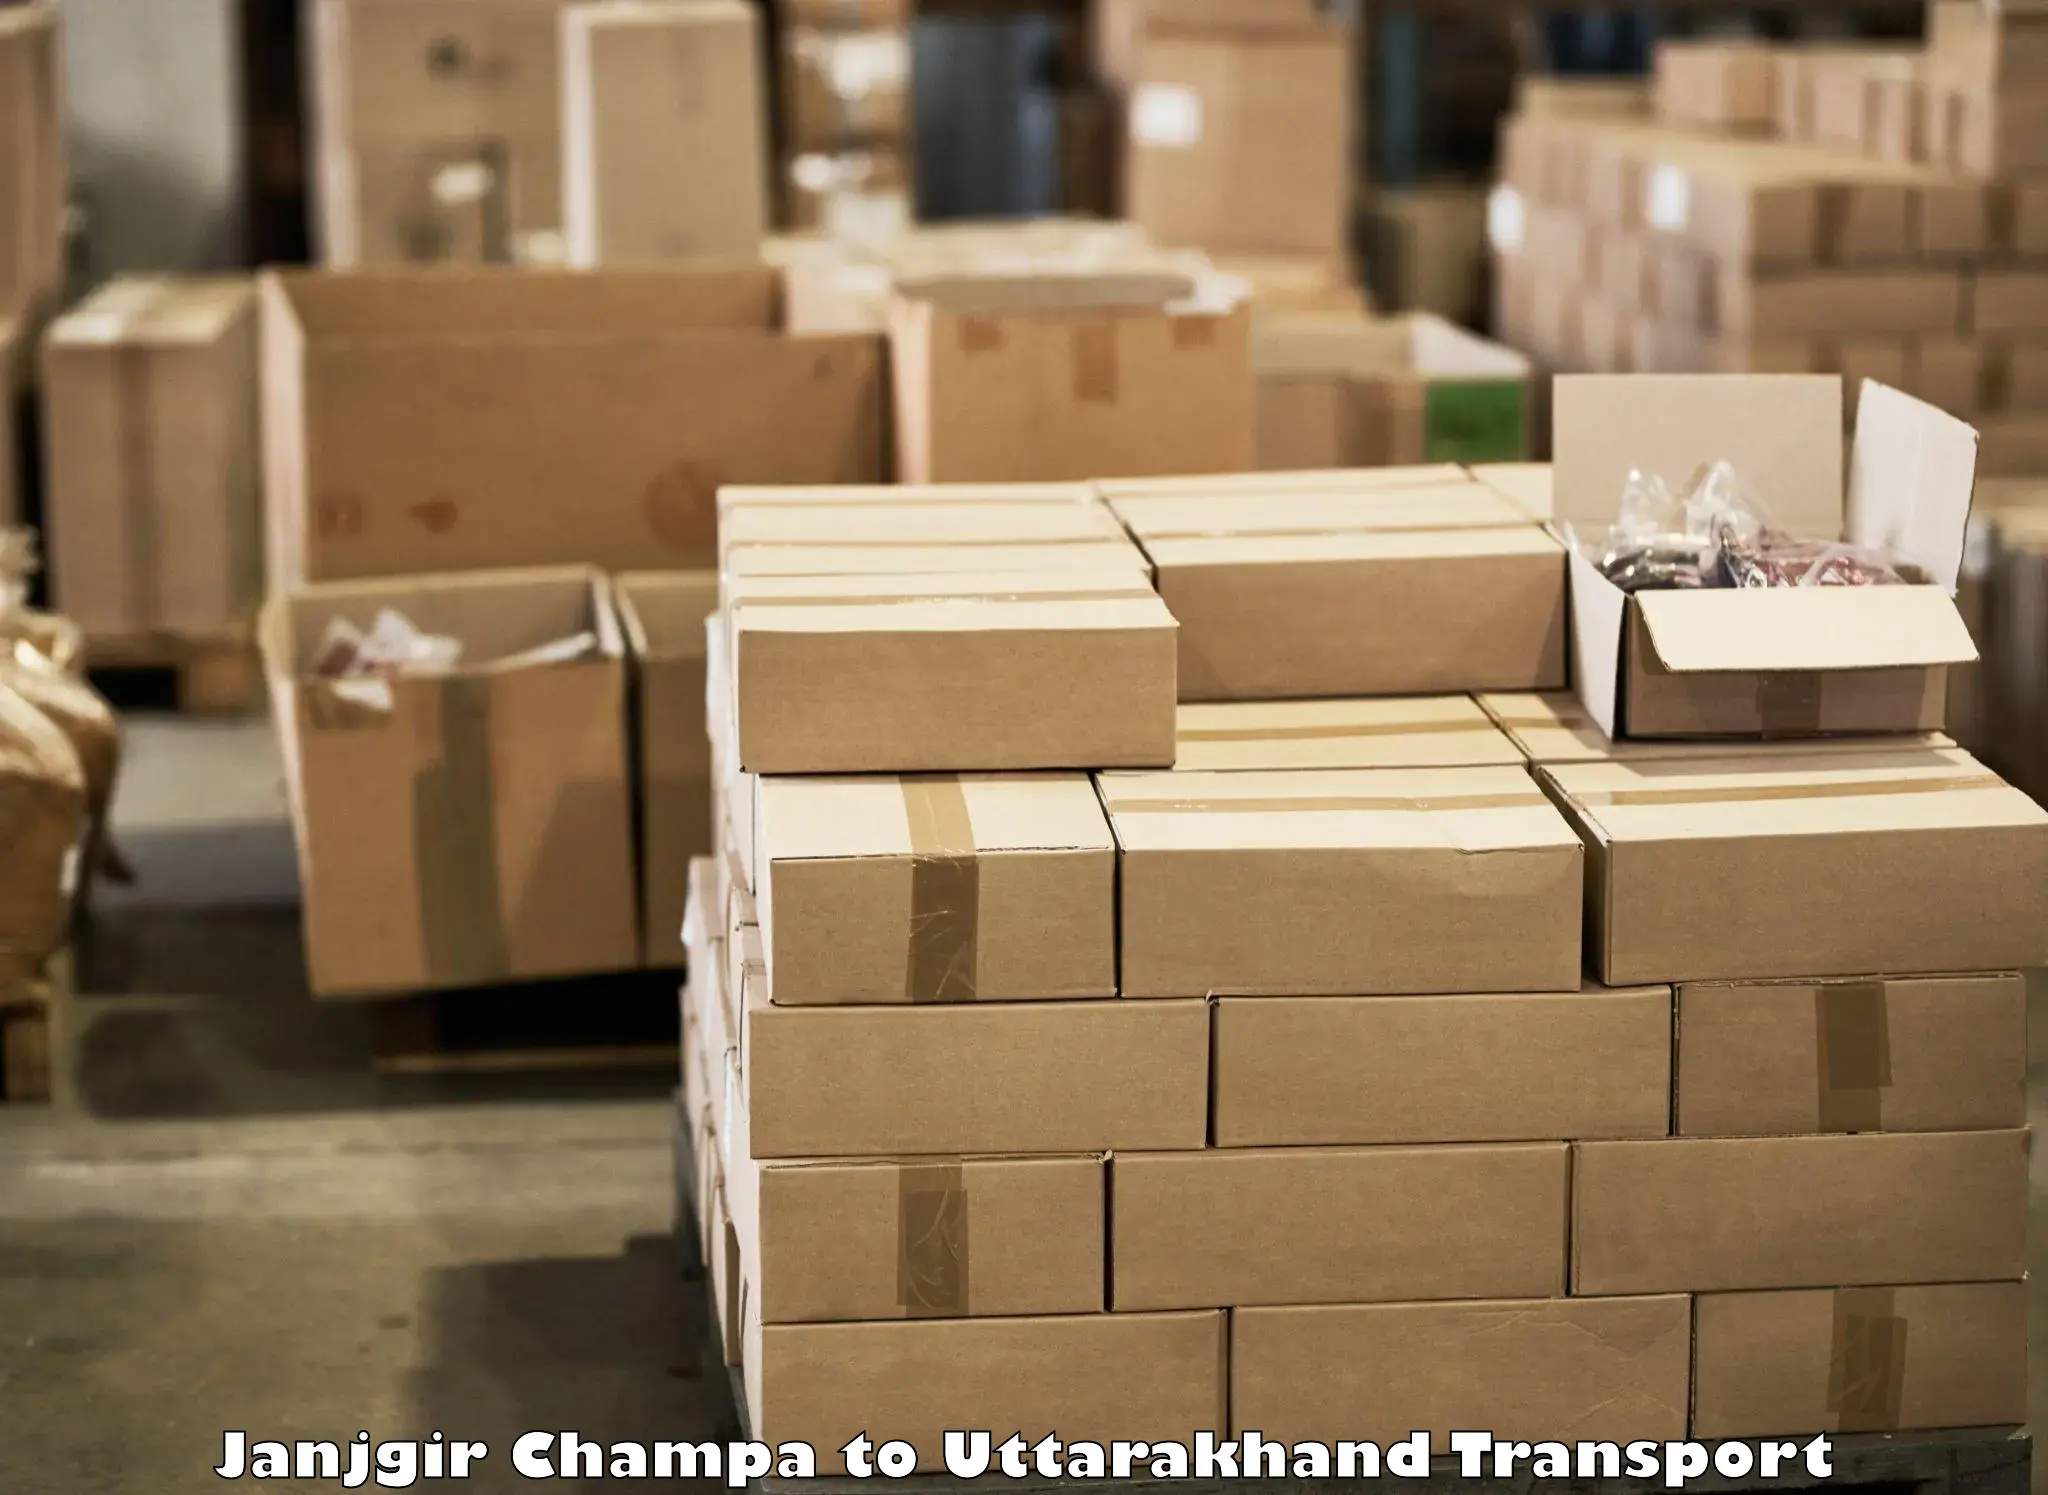 Goods delivery service Janjgir Champa to Rishikesh